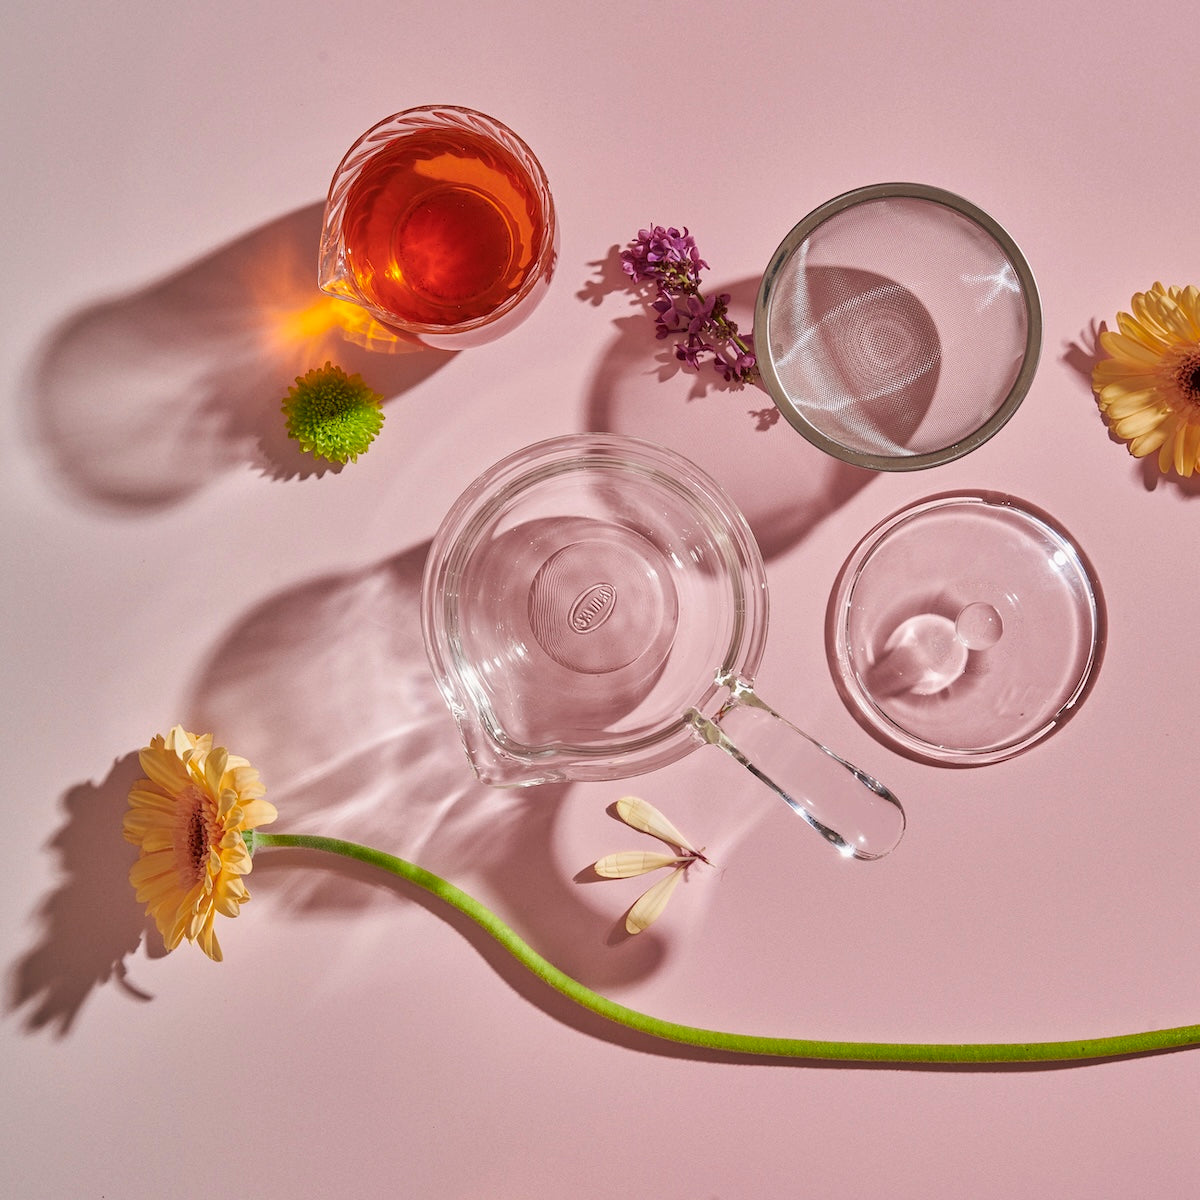 A Tea-in-Hand: The Perfect Steep Side-pour Ceremonial Teapot by Espresso Parts, two cups (one with a reddish liquid), flowers, and a glass stirrer are arranged artistically on a pink background. The shadows cast by the objects and flowers create a visually appealing composition, perfect for enjoying loose leaf teas.